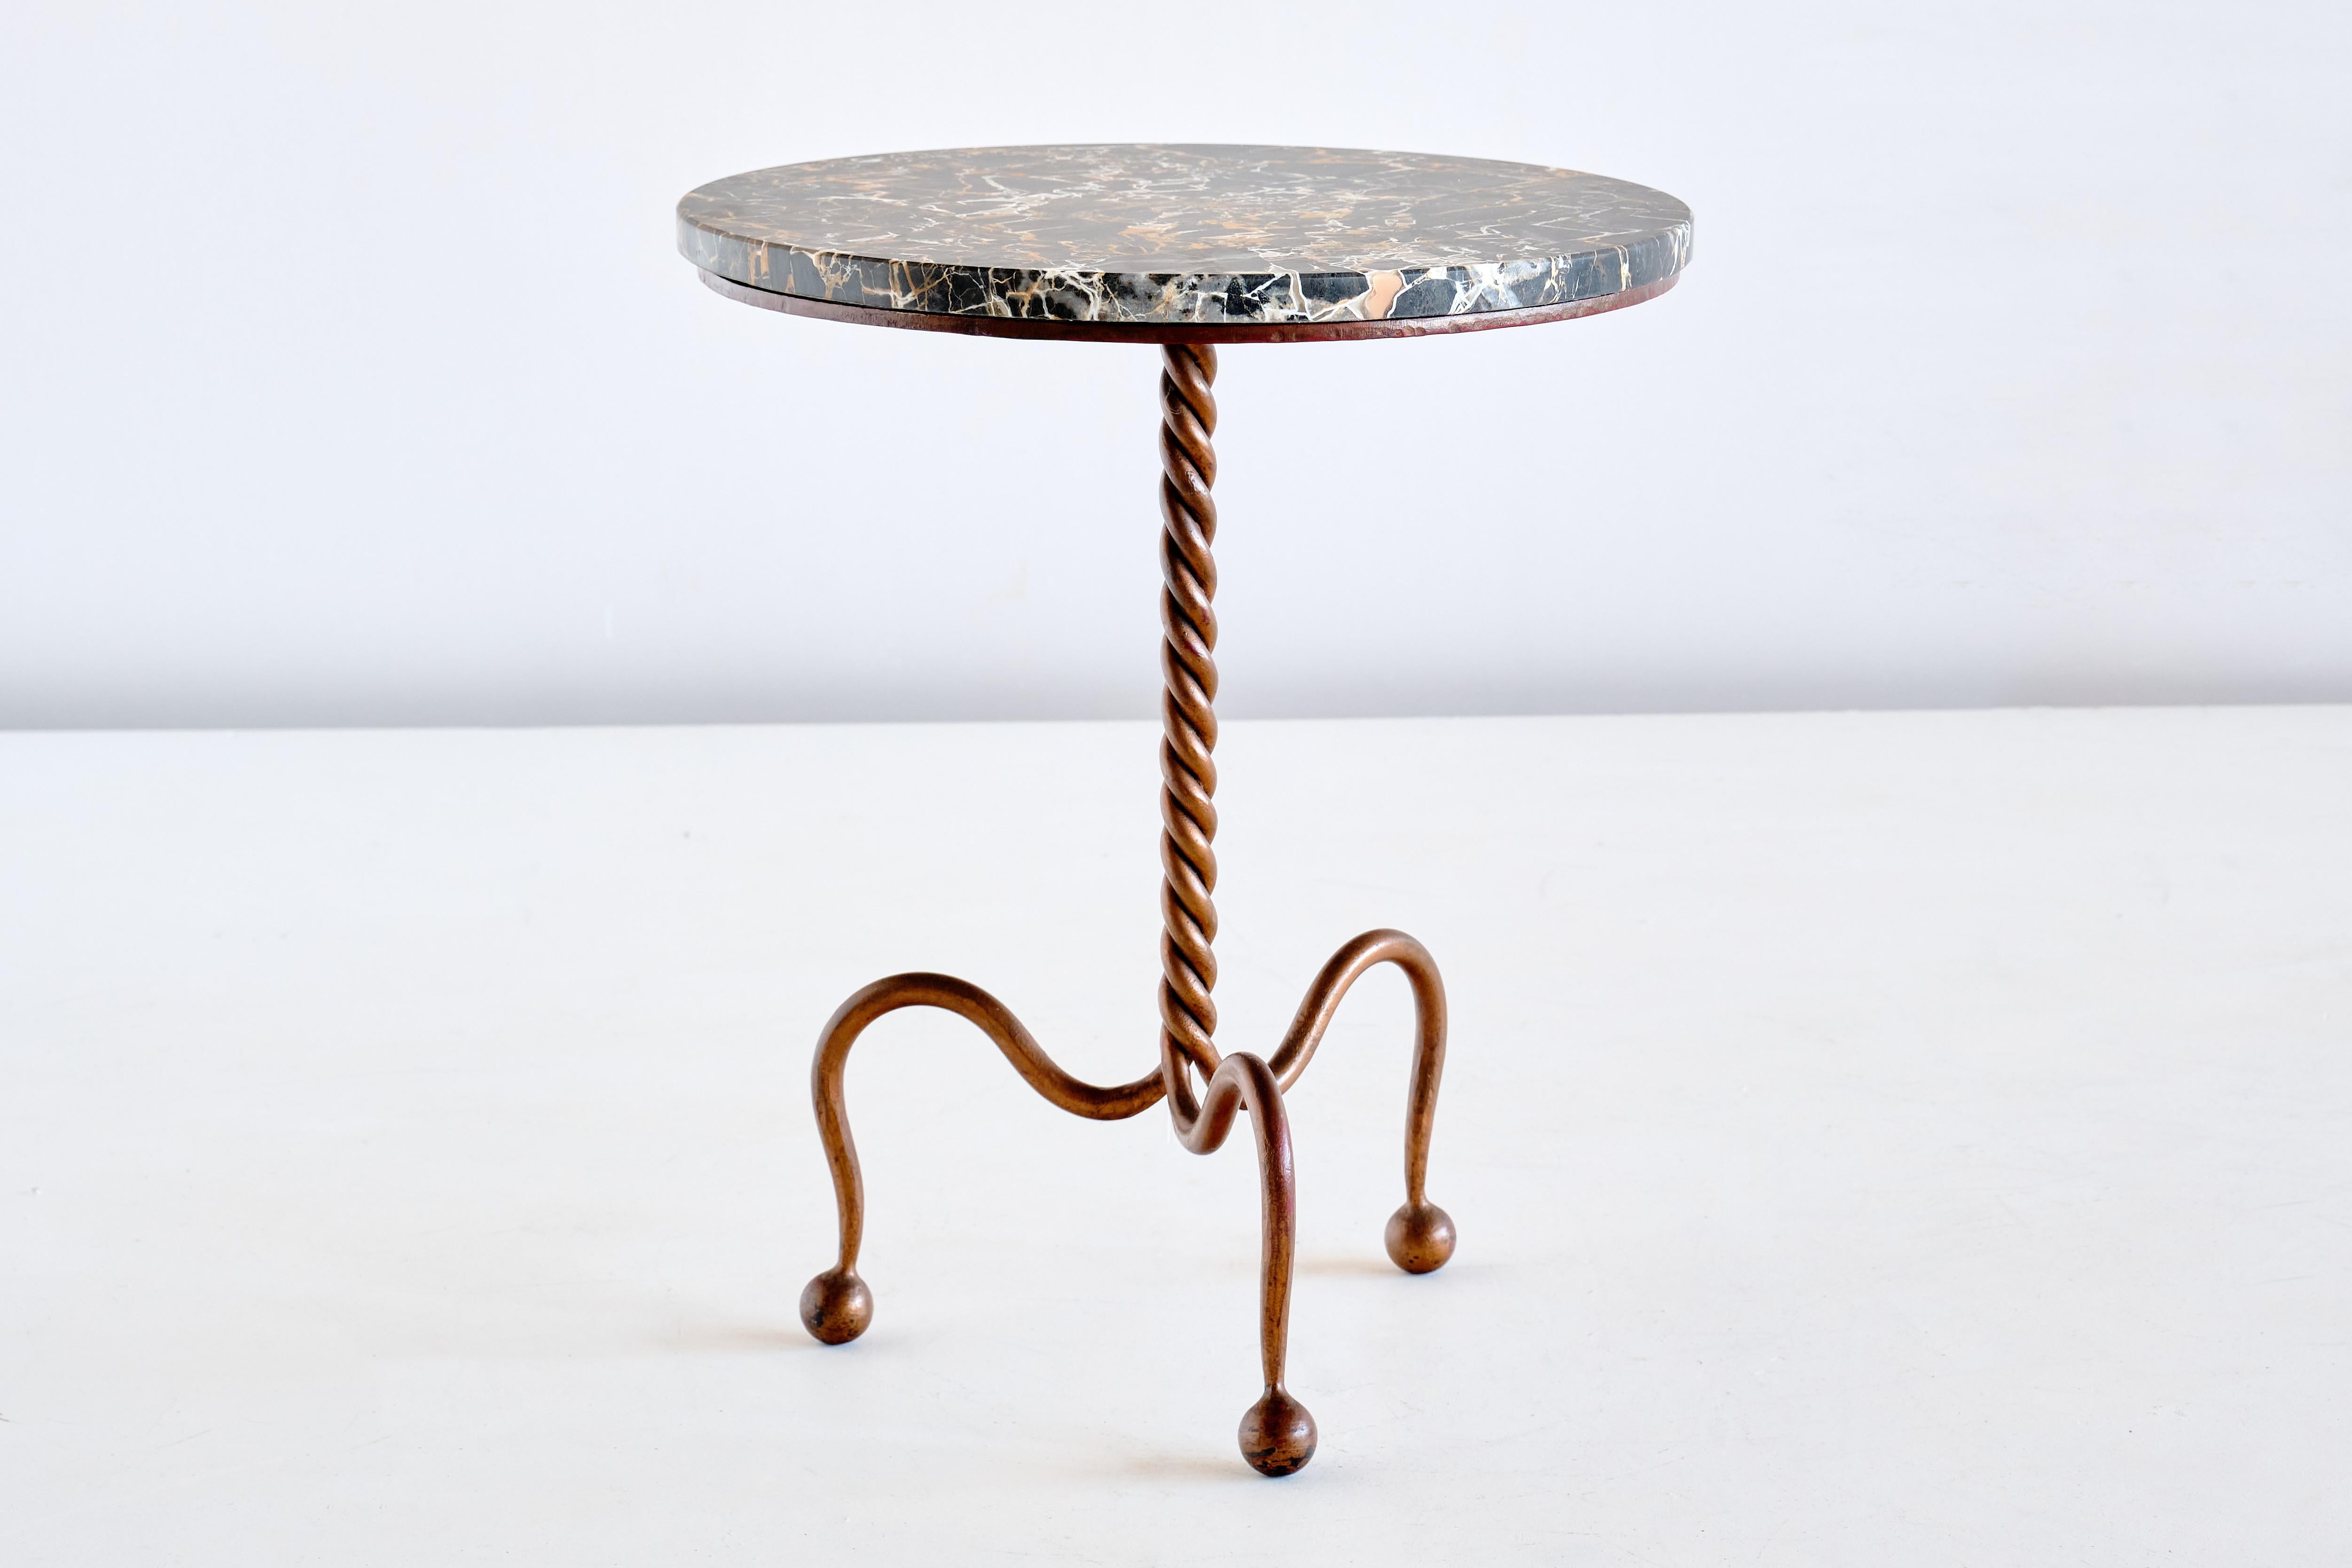 This rare side table was produced in France in the late 1930s. The design is attributed to René Prou. The elegant gilded iron frame consists of three spherical legs attached to the curved legs leading to the interwined center base in a braided rope